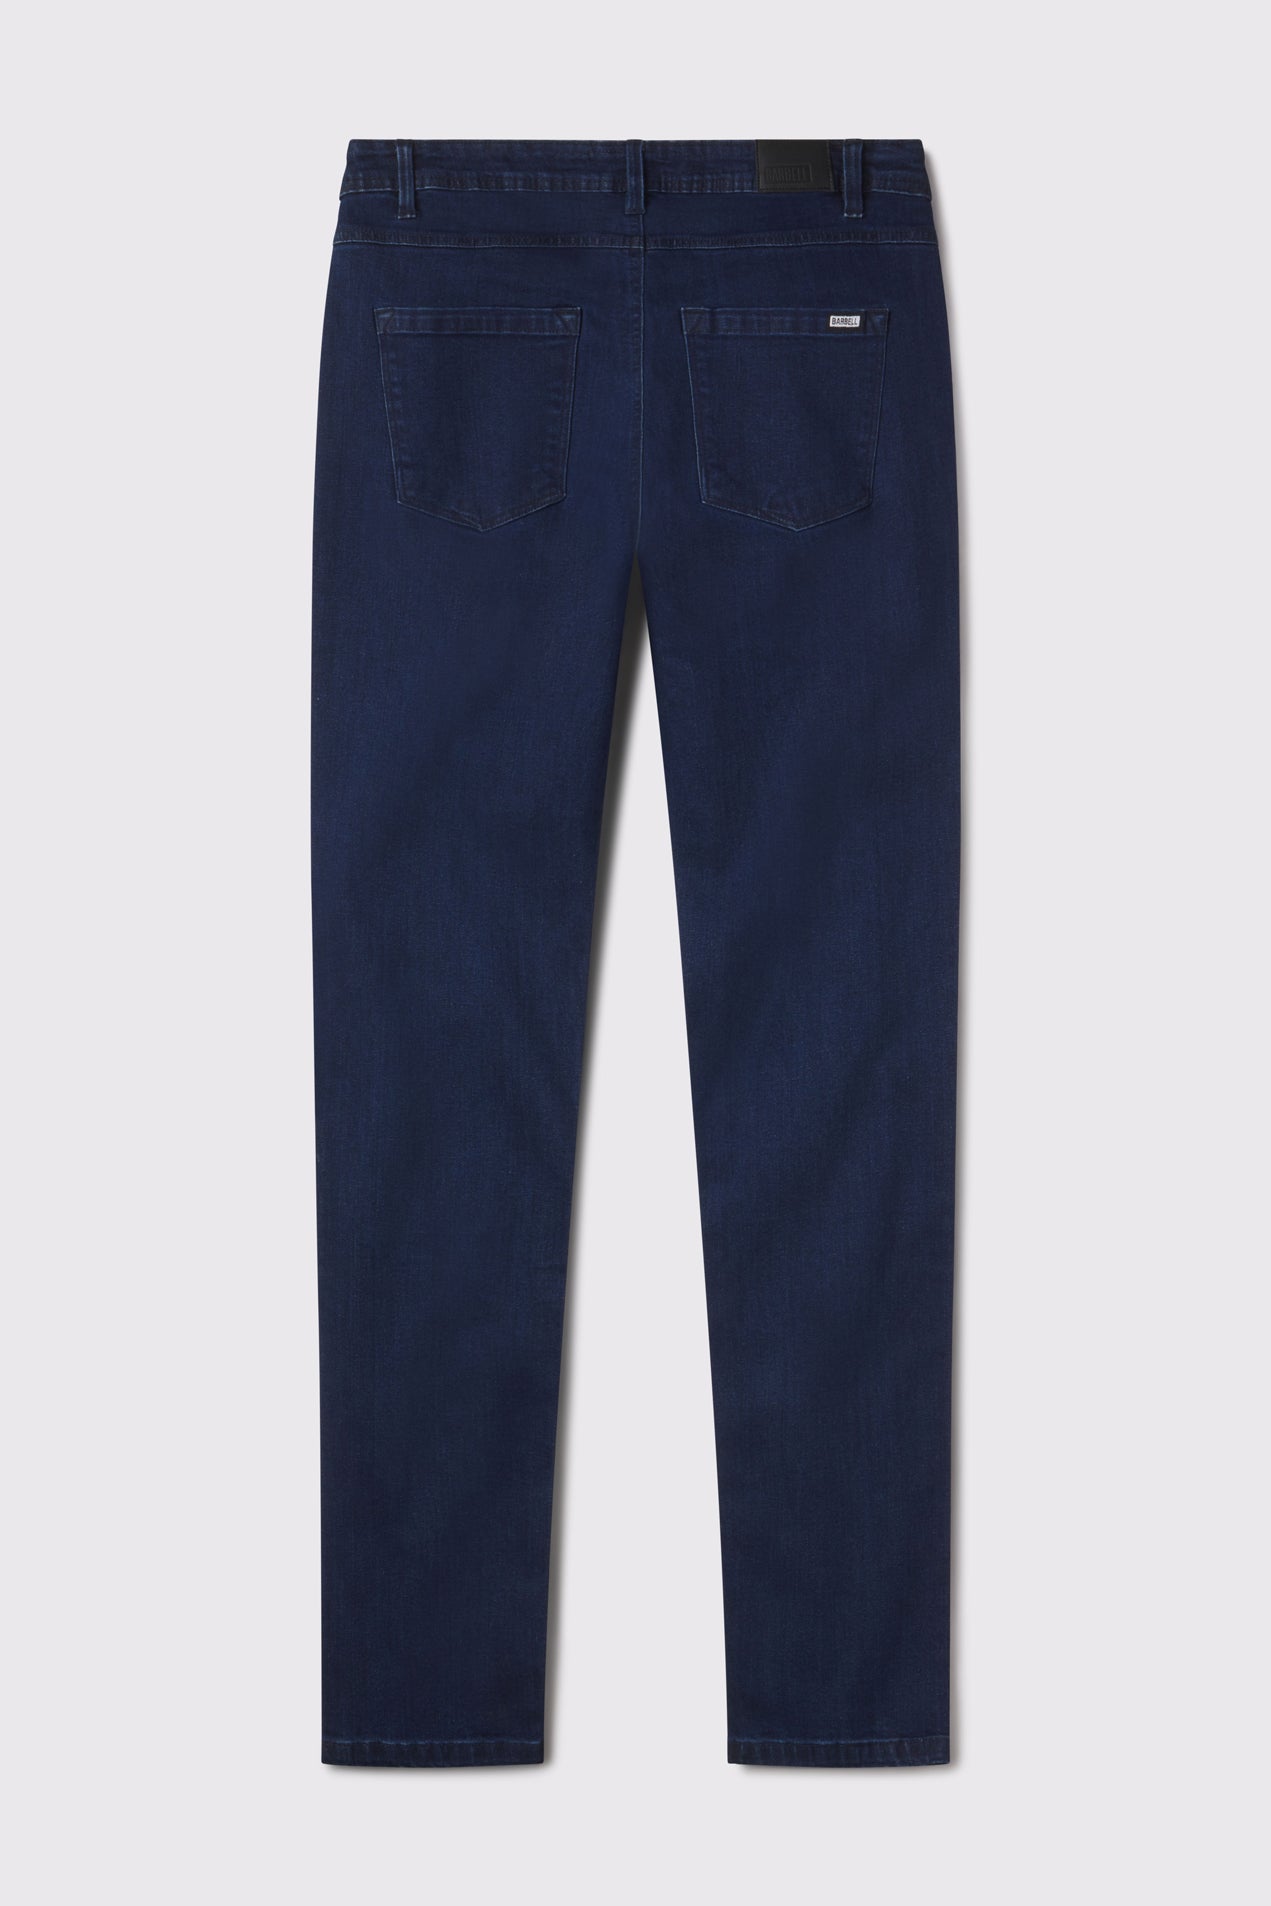 Straight Athletic Fit Jeans 2.0 (Tall)